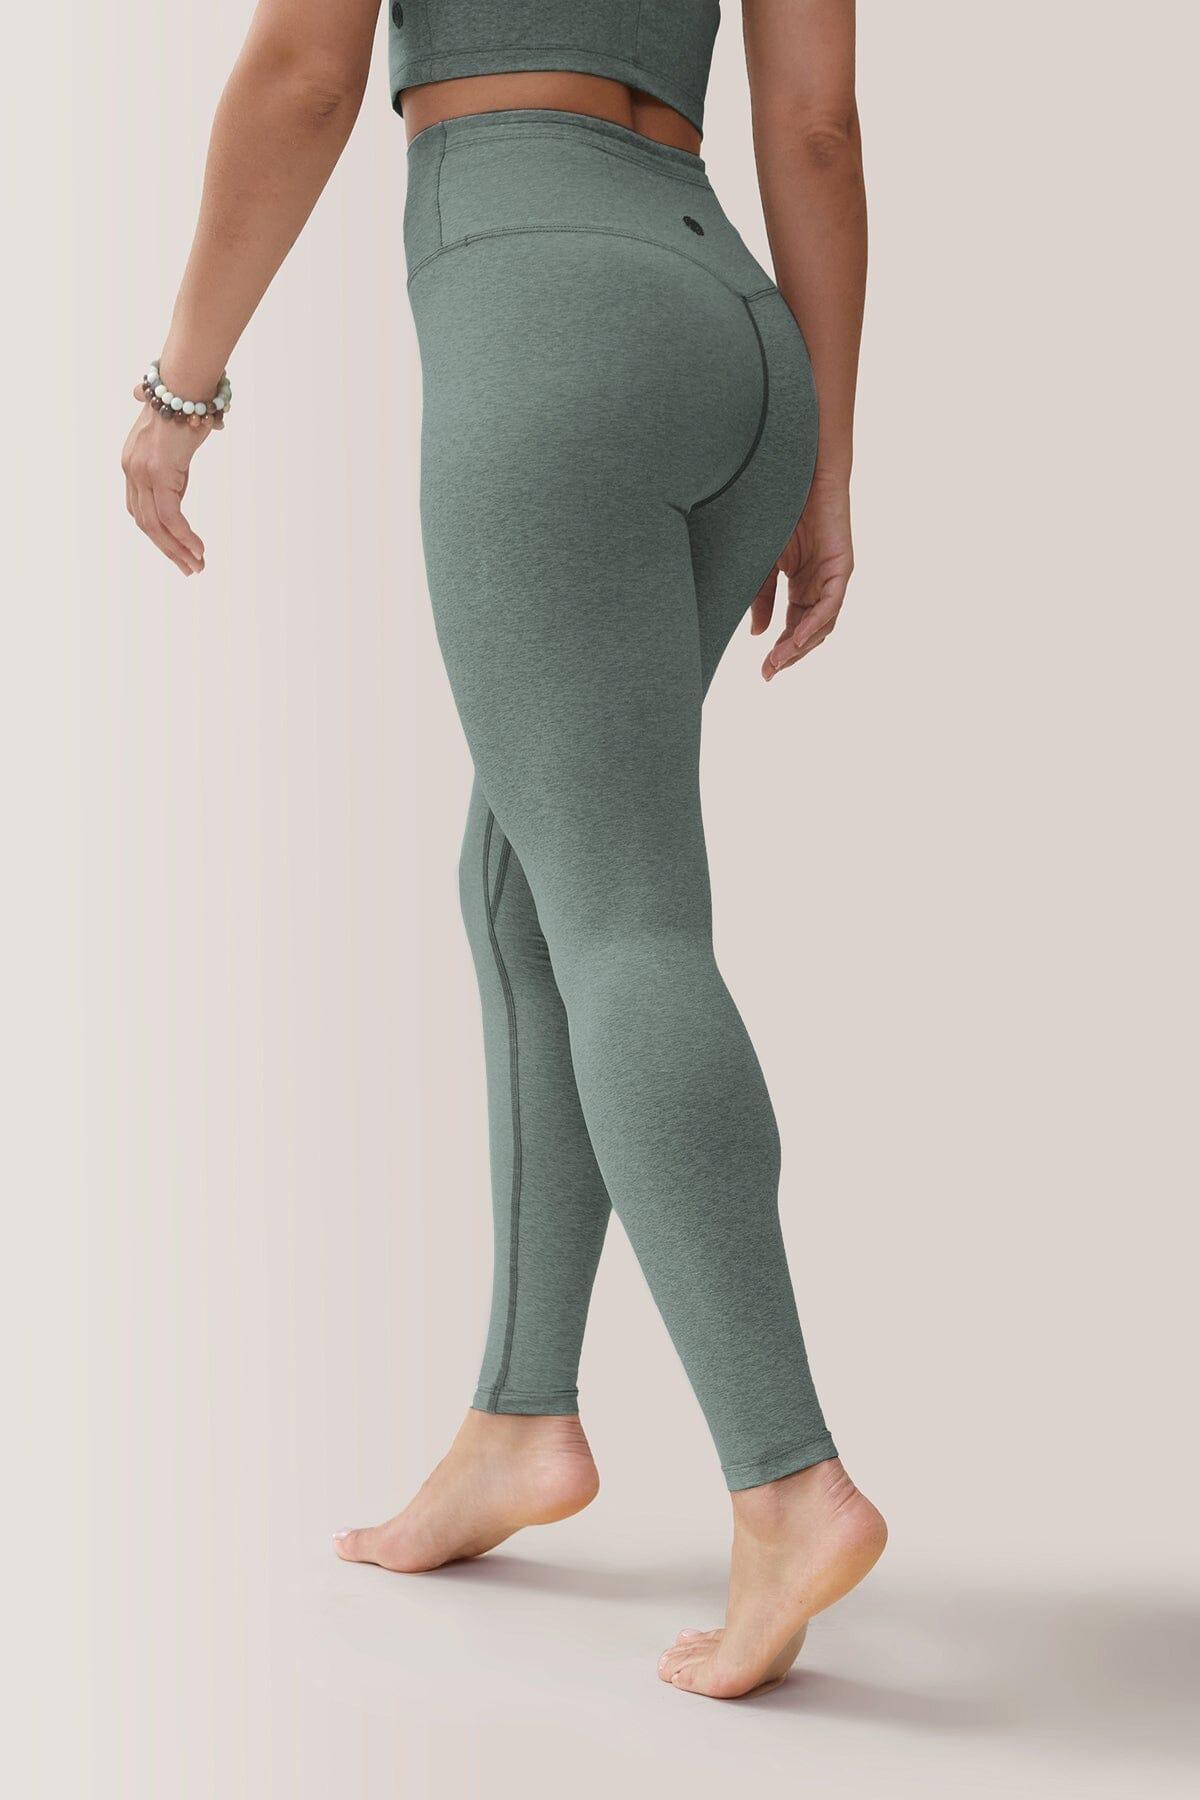 Femme qui porte les leggings taille-haute Buttery Soft BFF de Rose Boreal./ Womean wearing the Buttery Soft BFF High-Rise Legging from Rose Boreal. -Teal / Agave